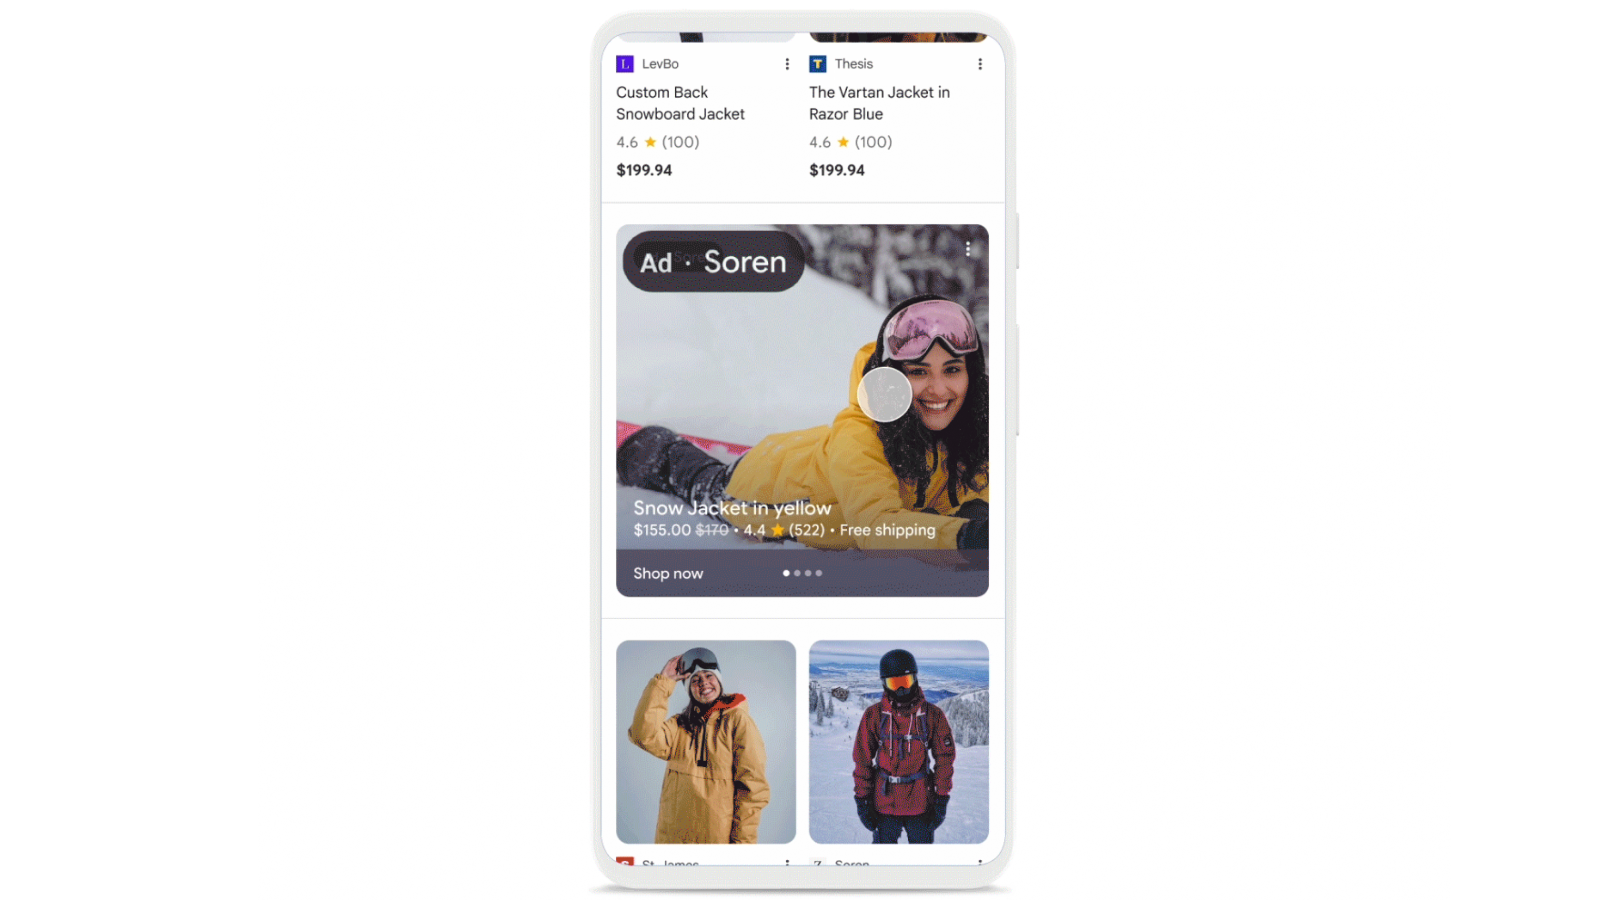 Shopping Ads in mobile search results